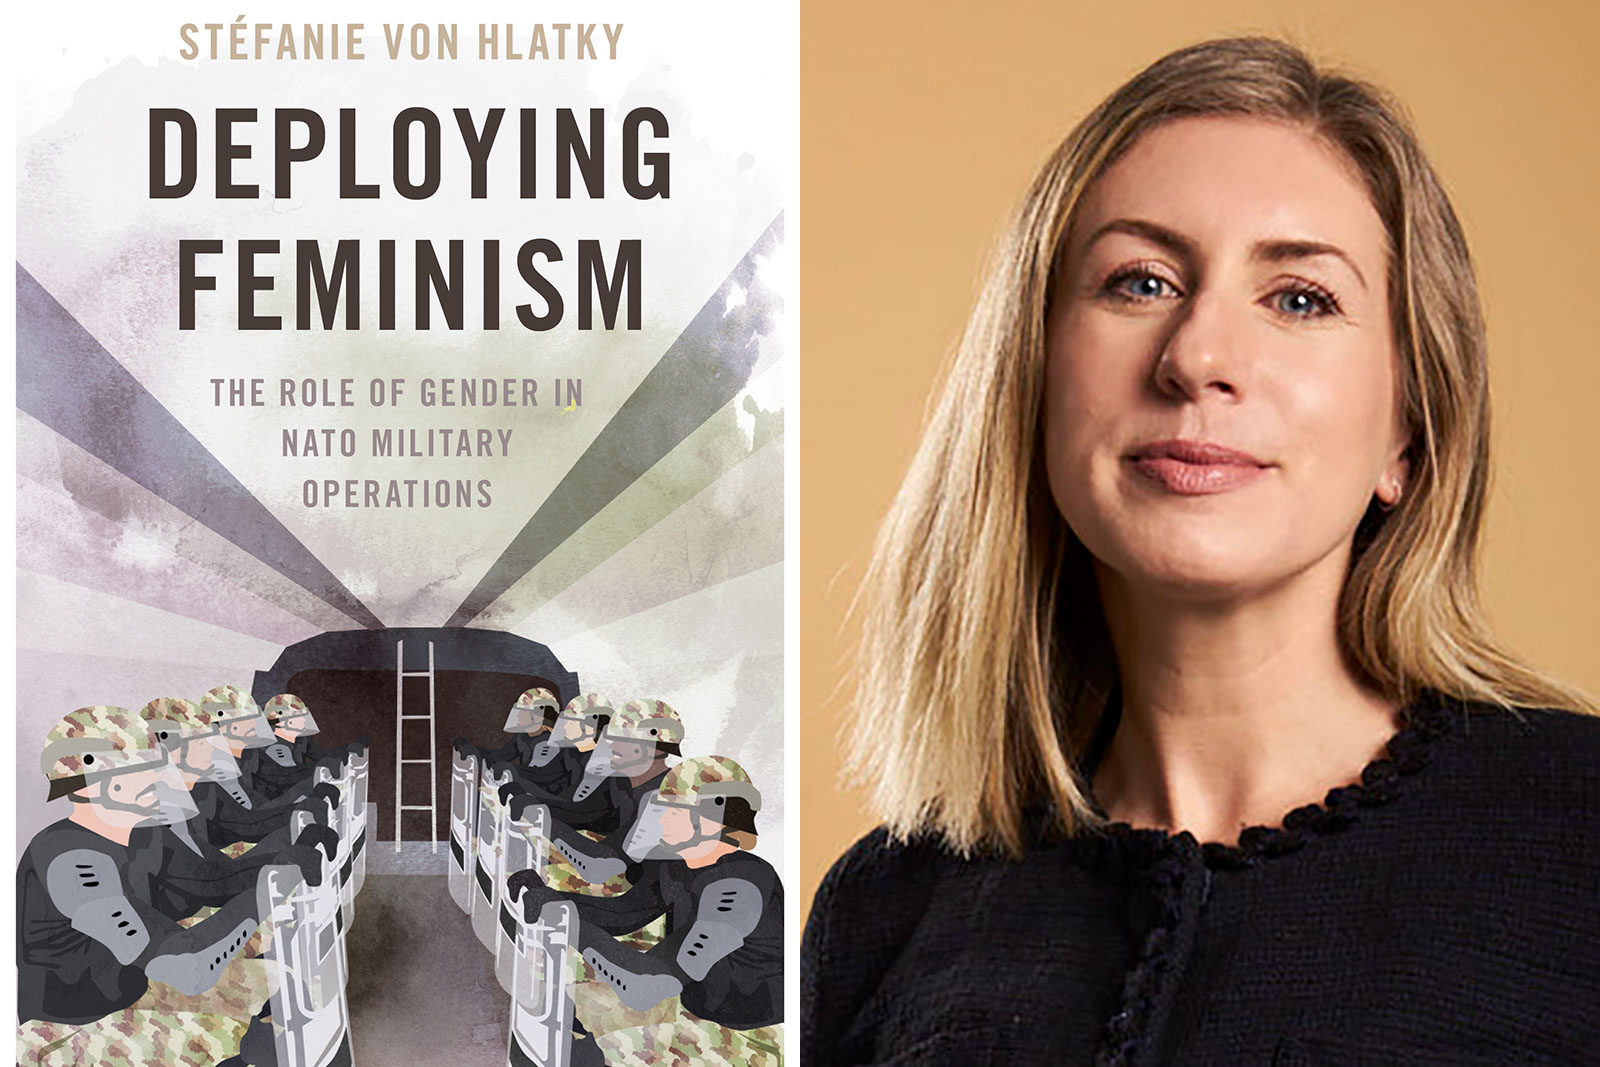 Book cover beside photo of Stefanie van Hlatky. Book cover is an image of soldiers sitting on either side of aircraft with the title covering the roof.